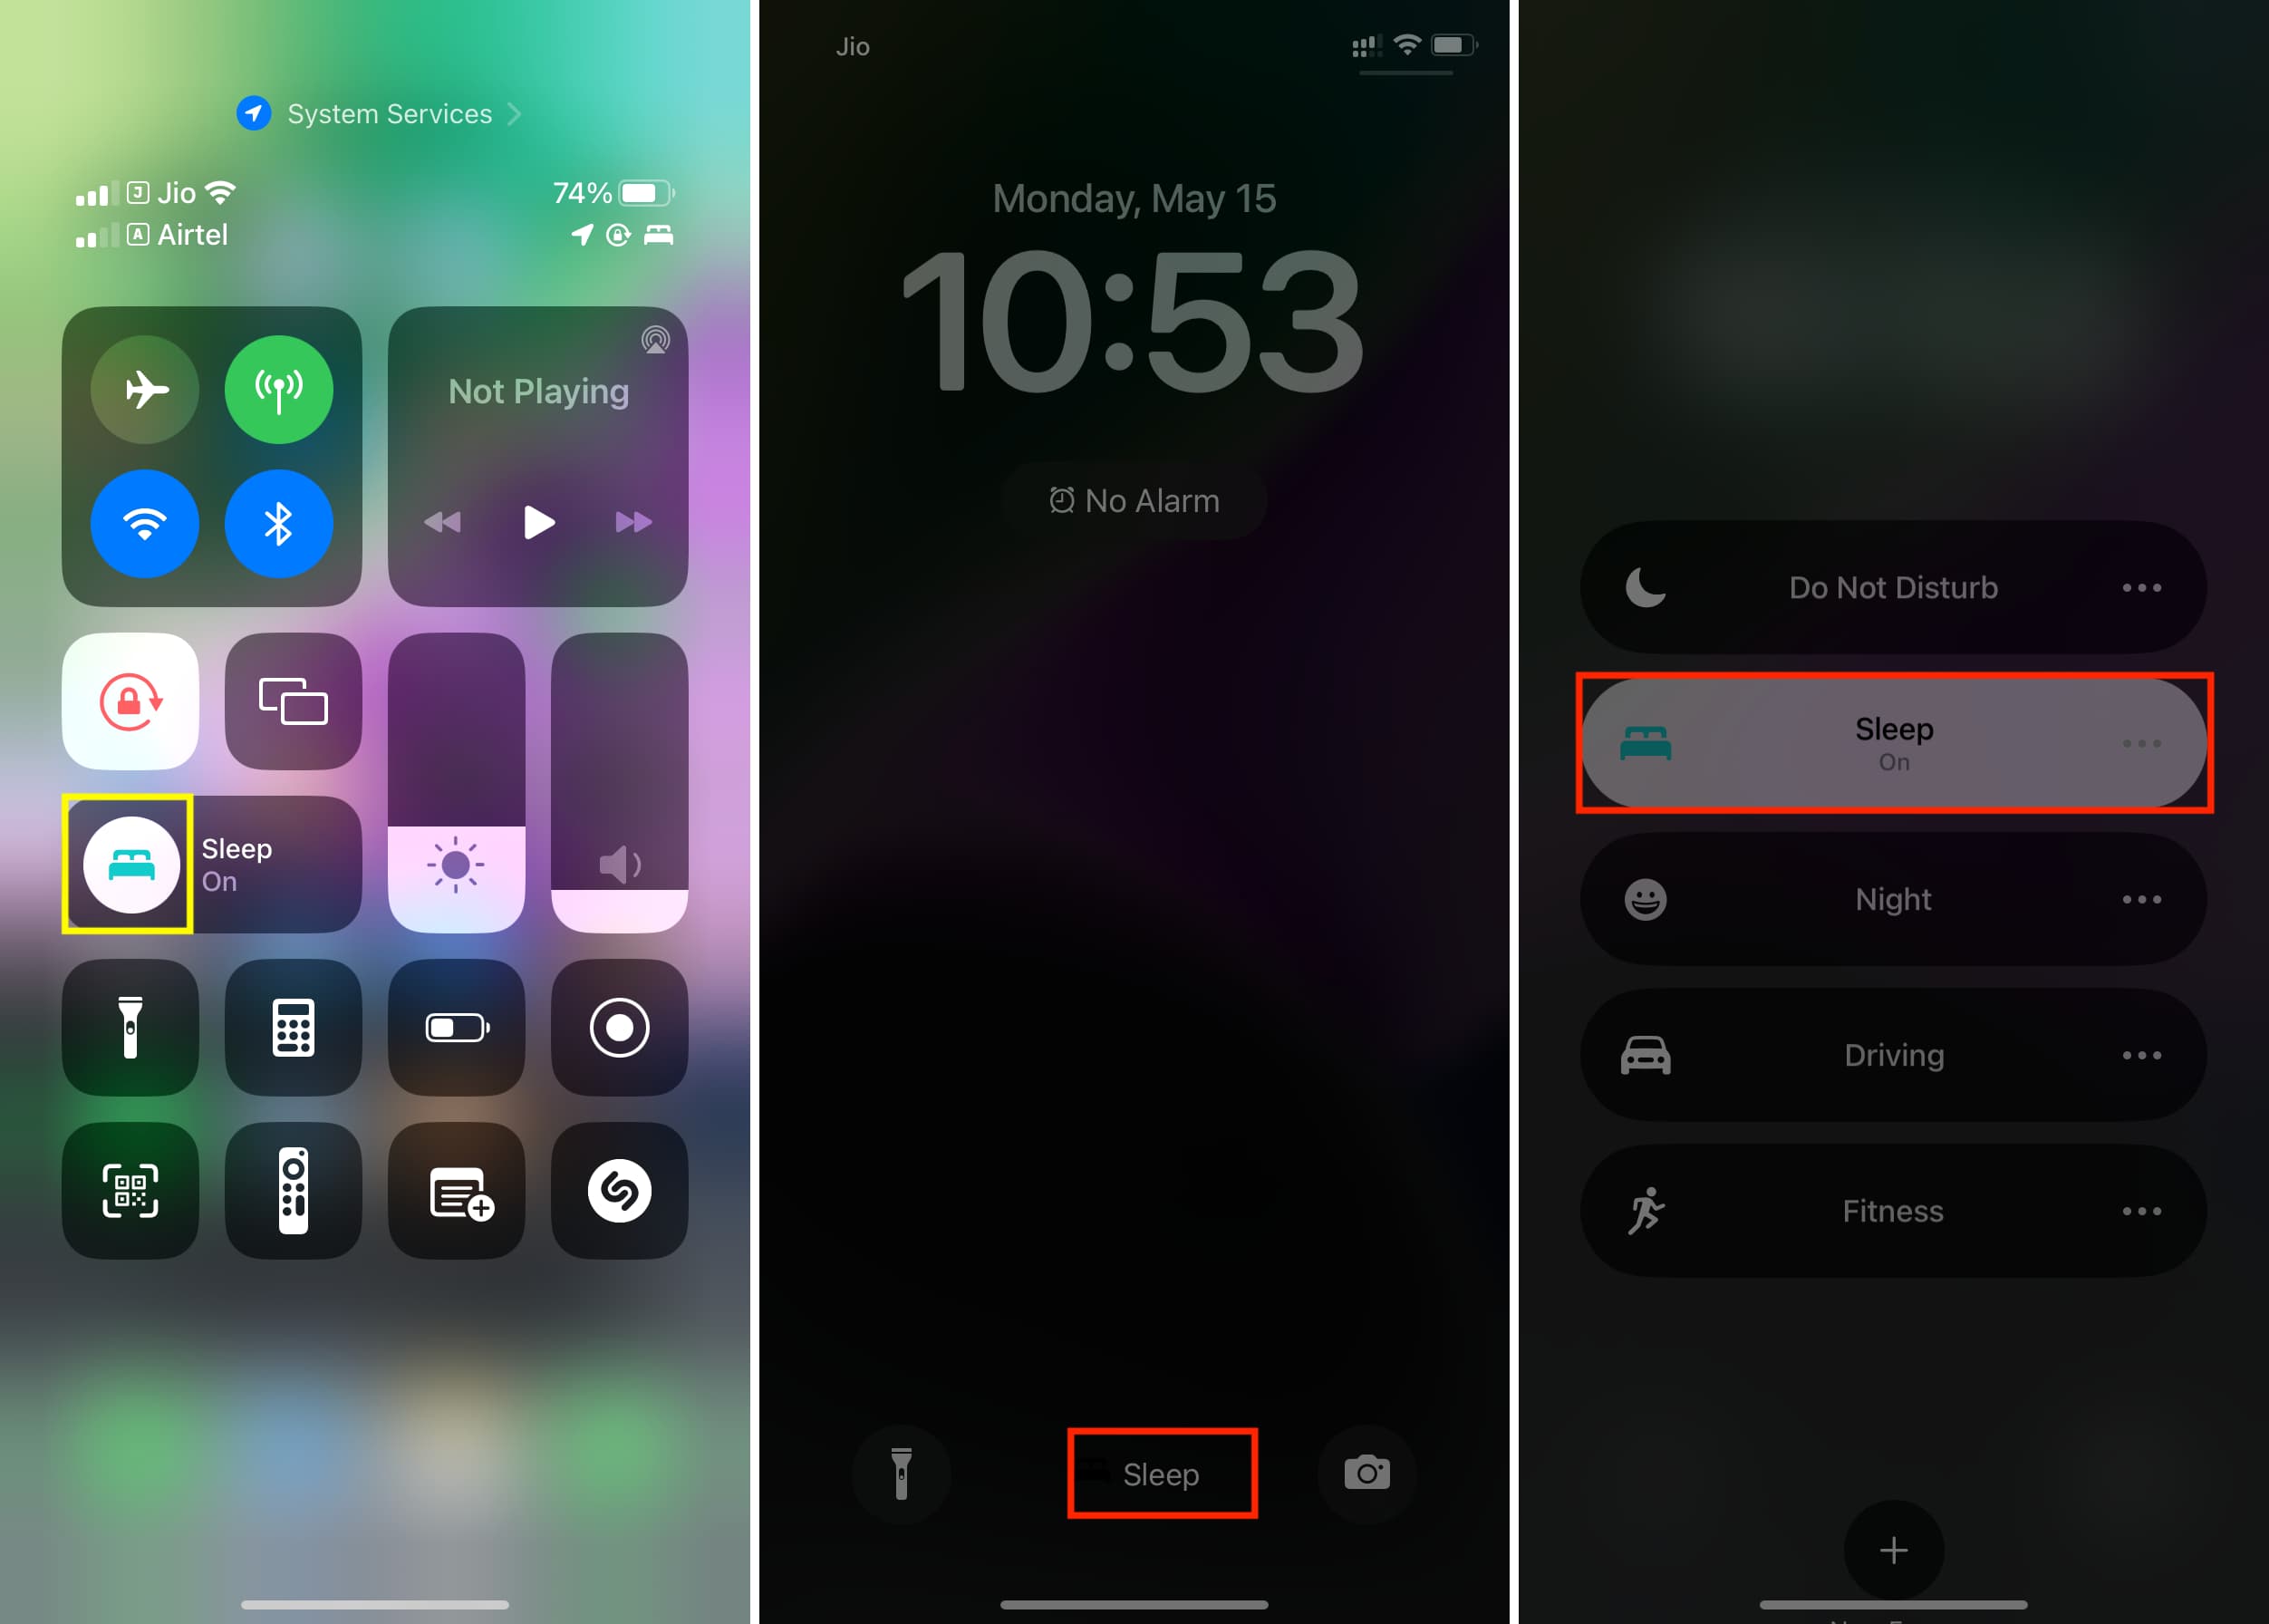 Turn off Focus on iPhone from Control Center and Lock Screen